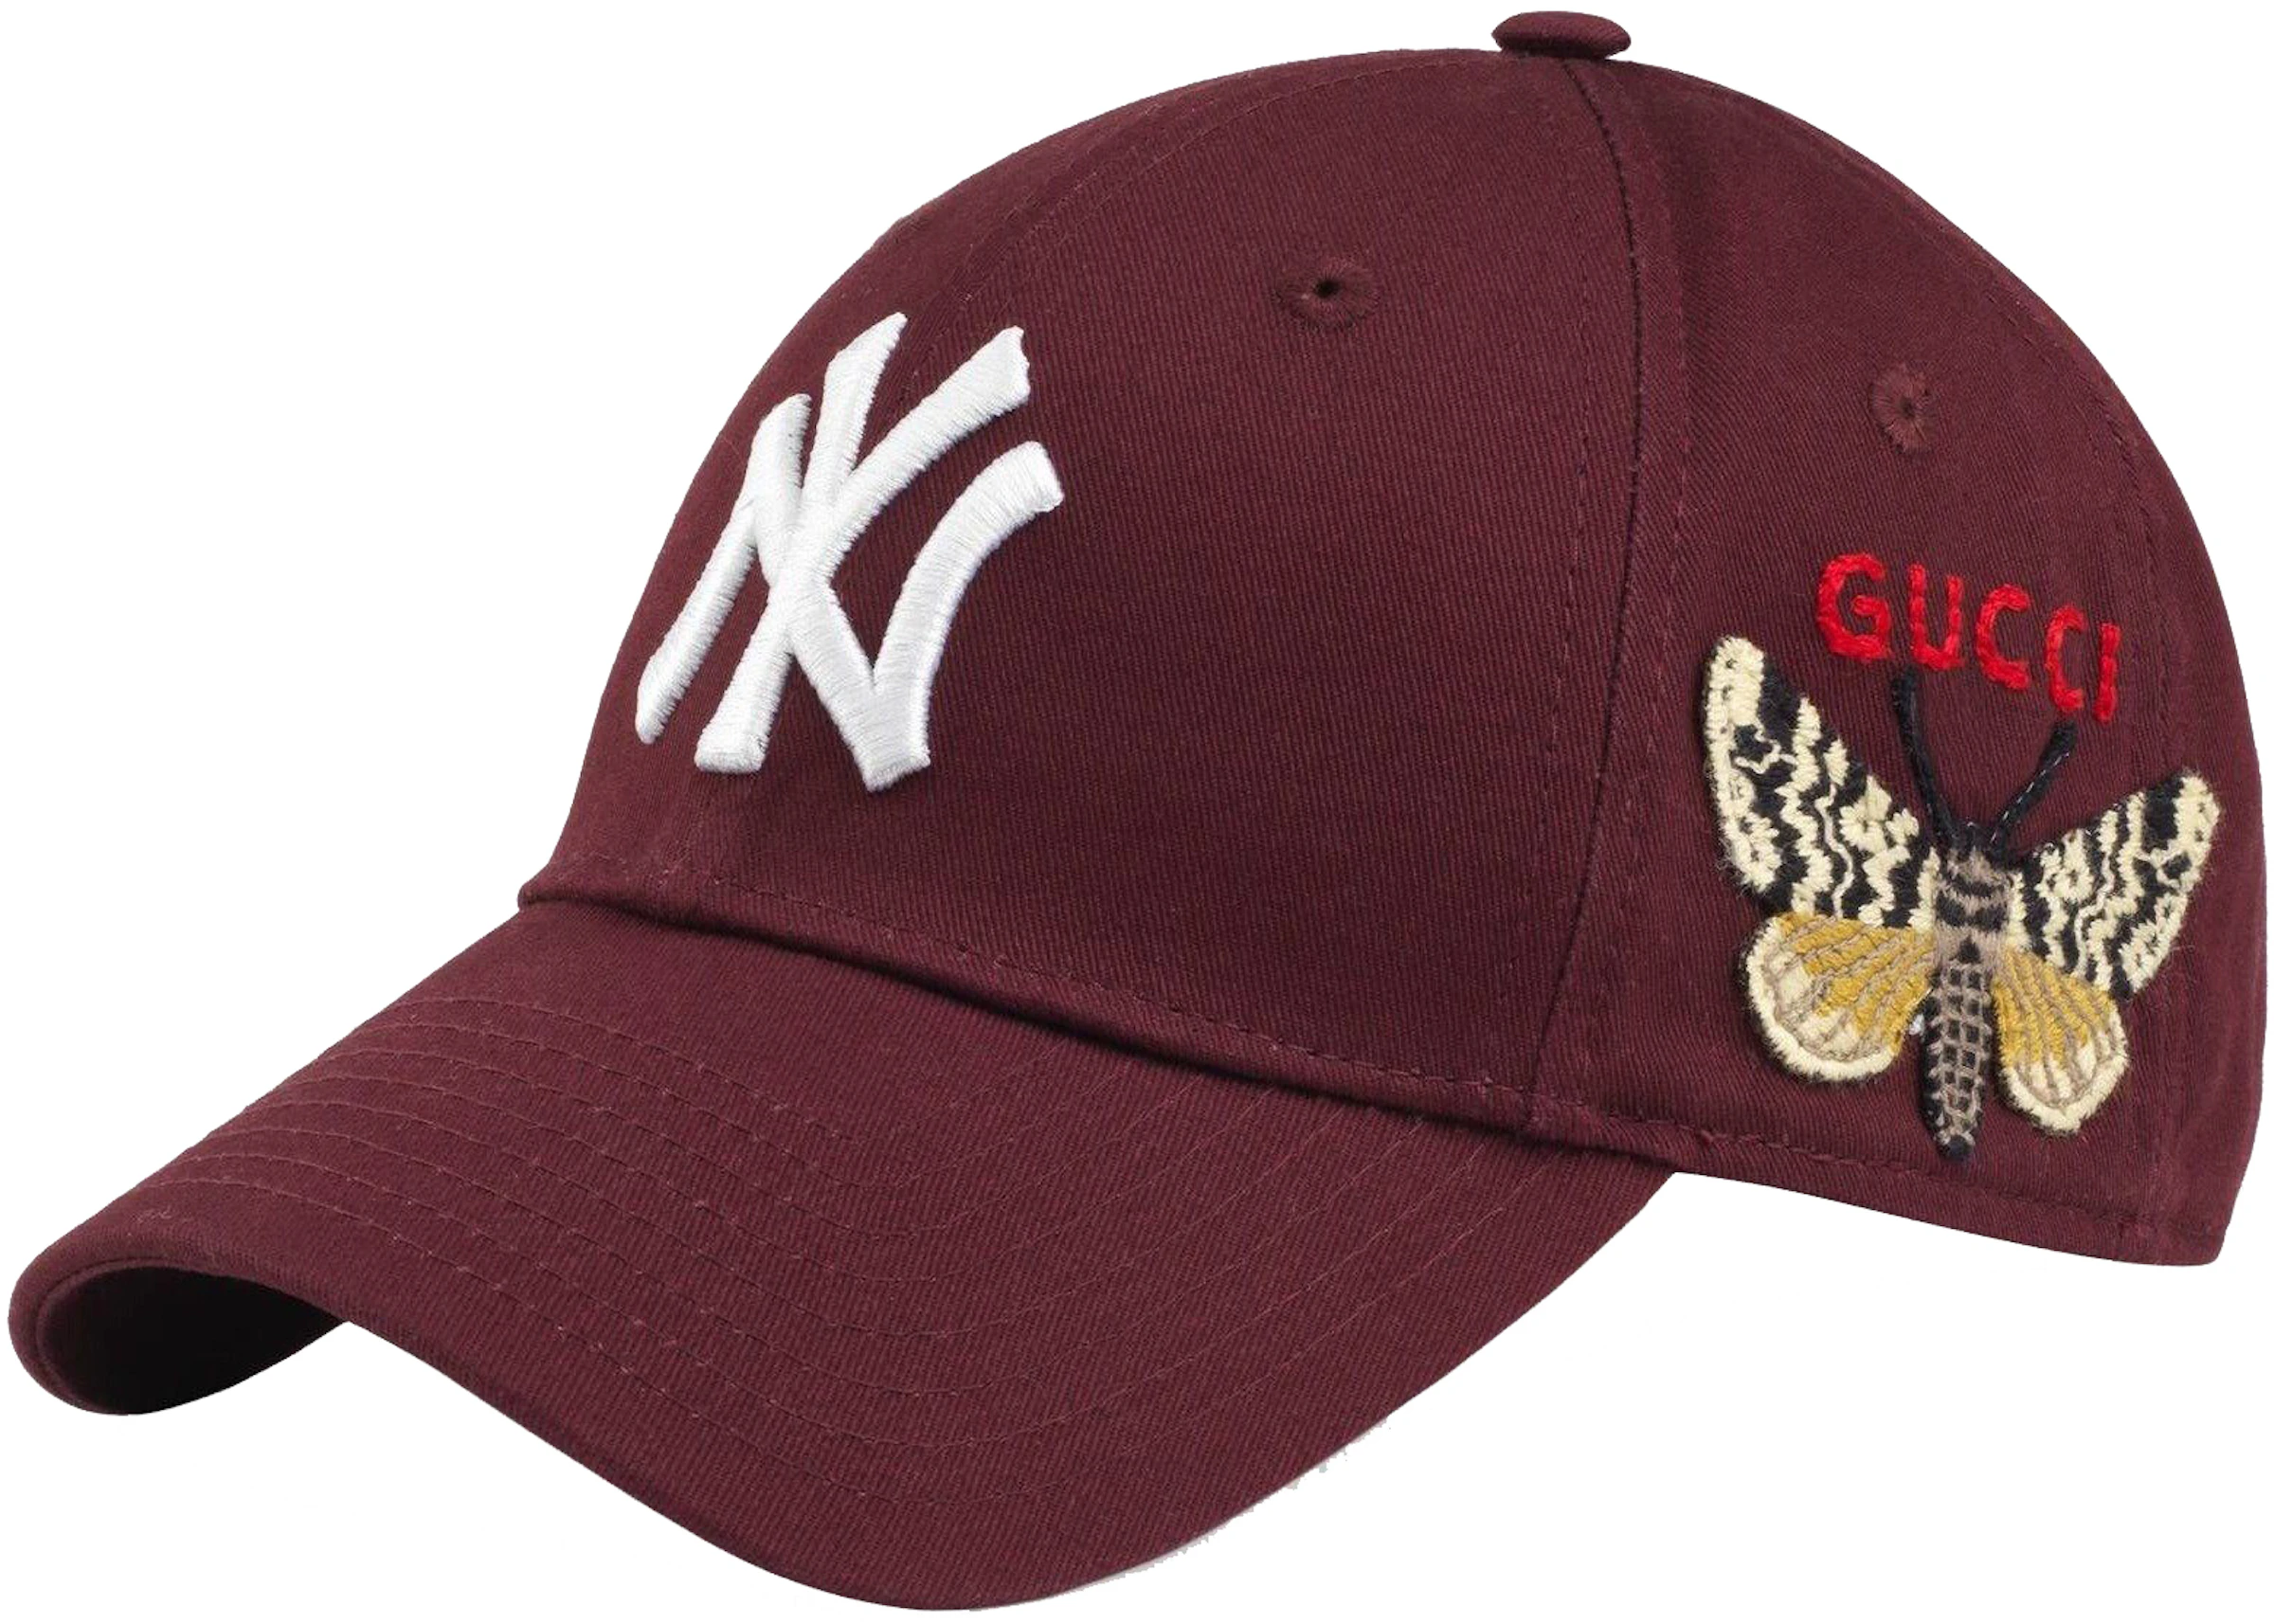 Gucci NY Yankees Embroidered Butterfly Baseball Cap Burgundy - SS20 - US